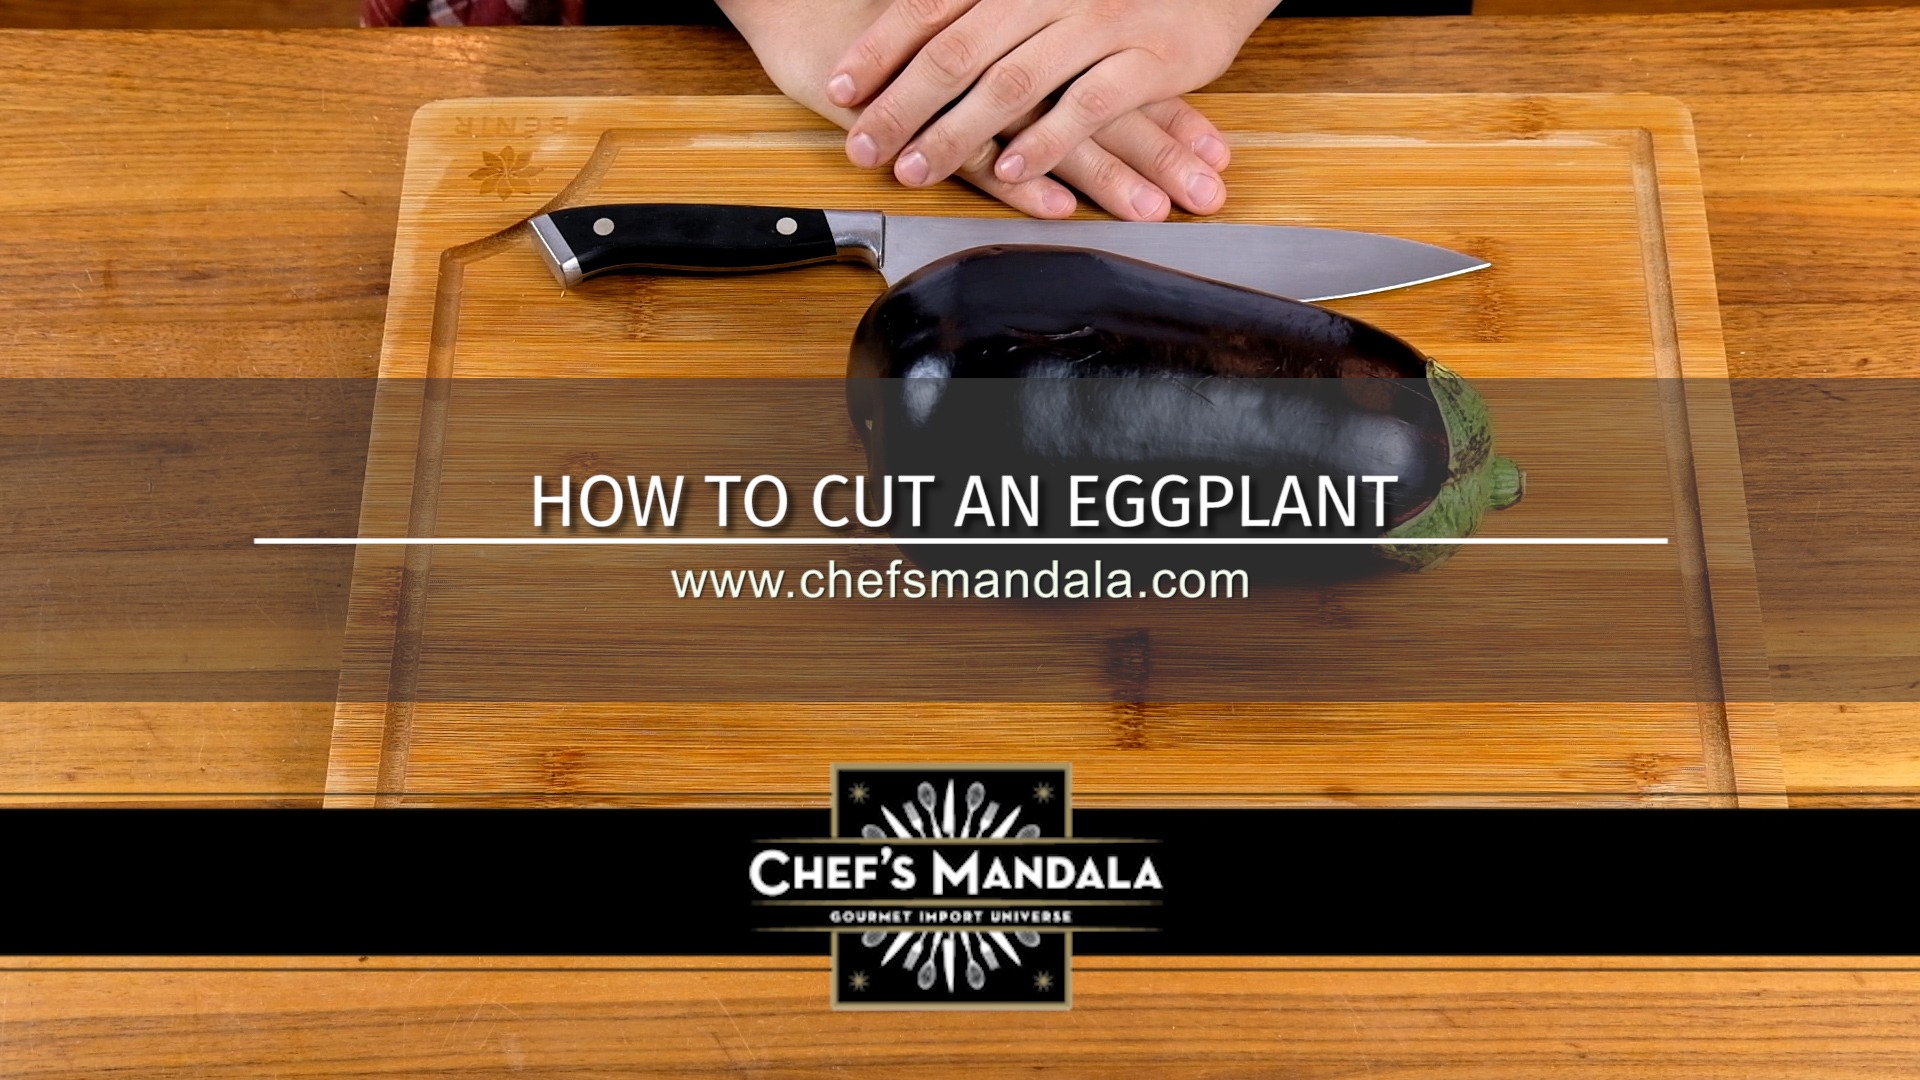 HOW TO CUT AN EGGPLANT